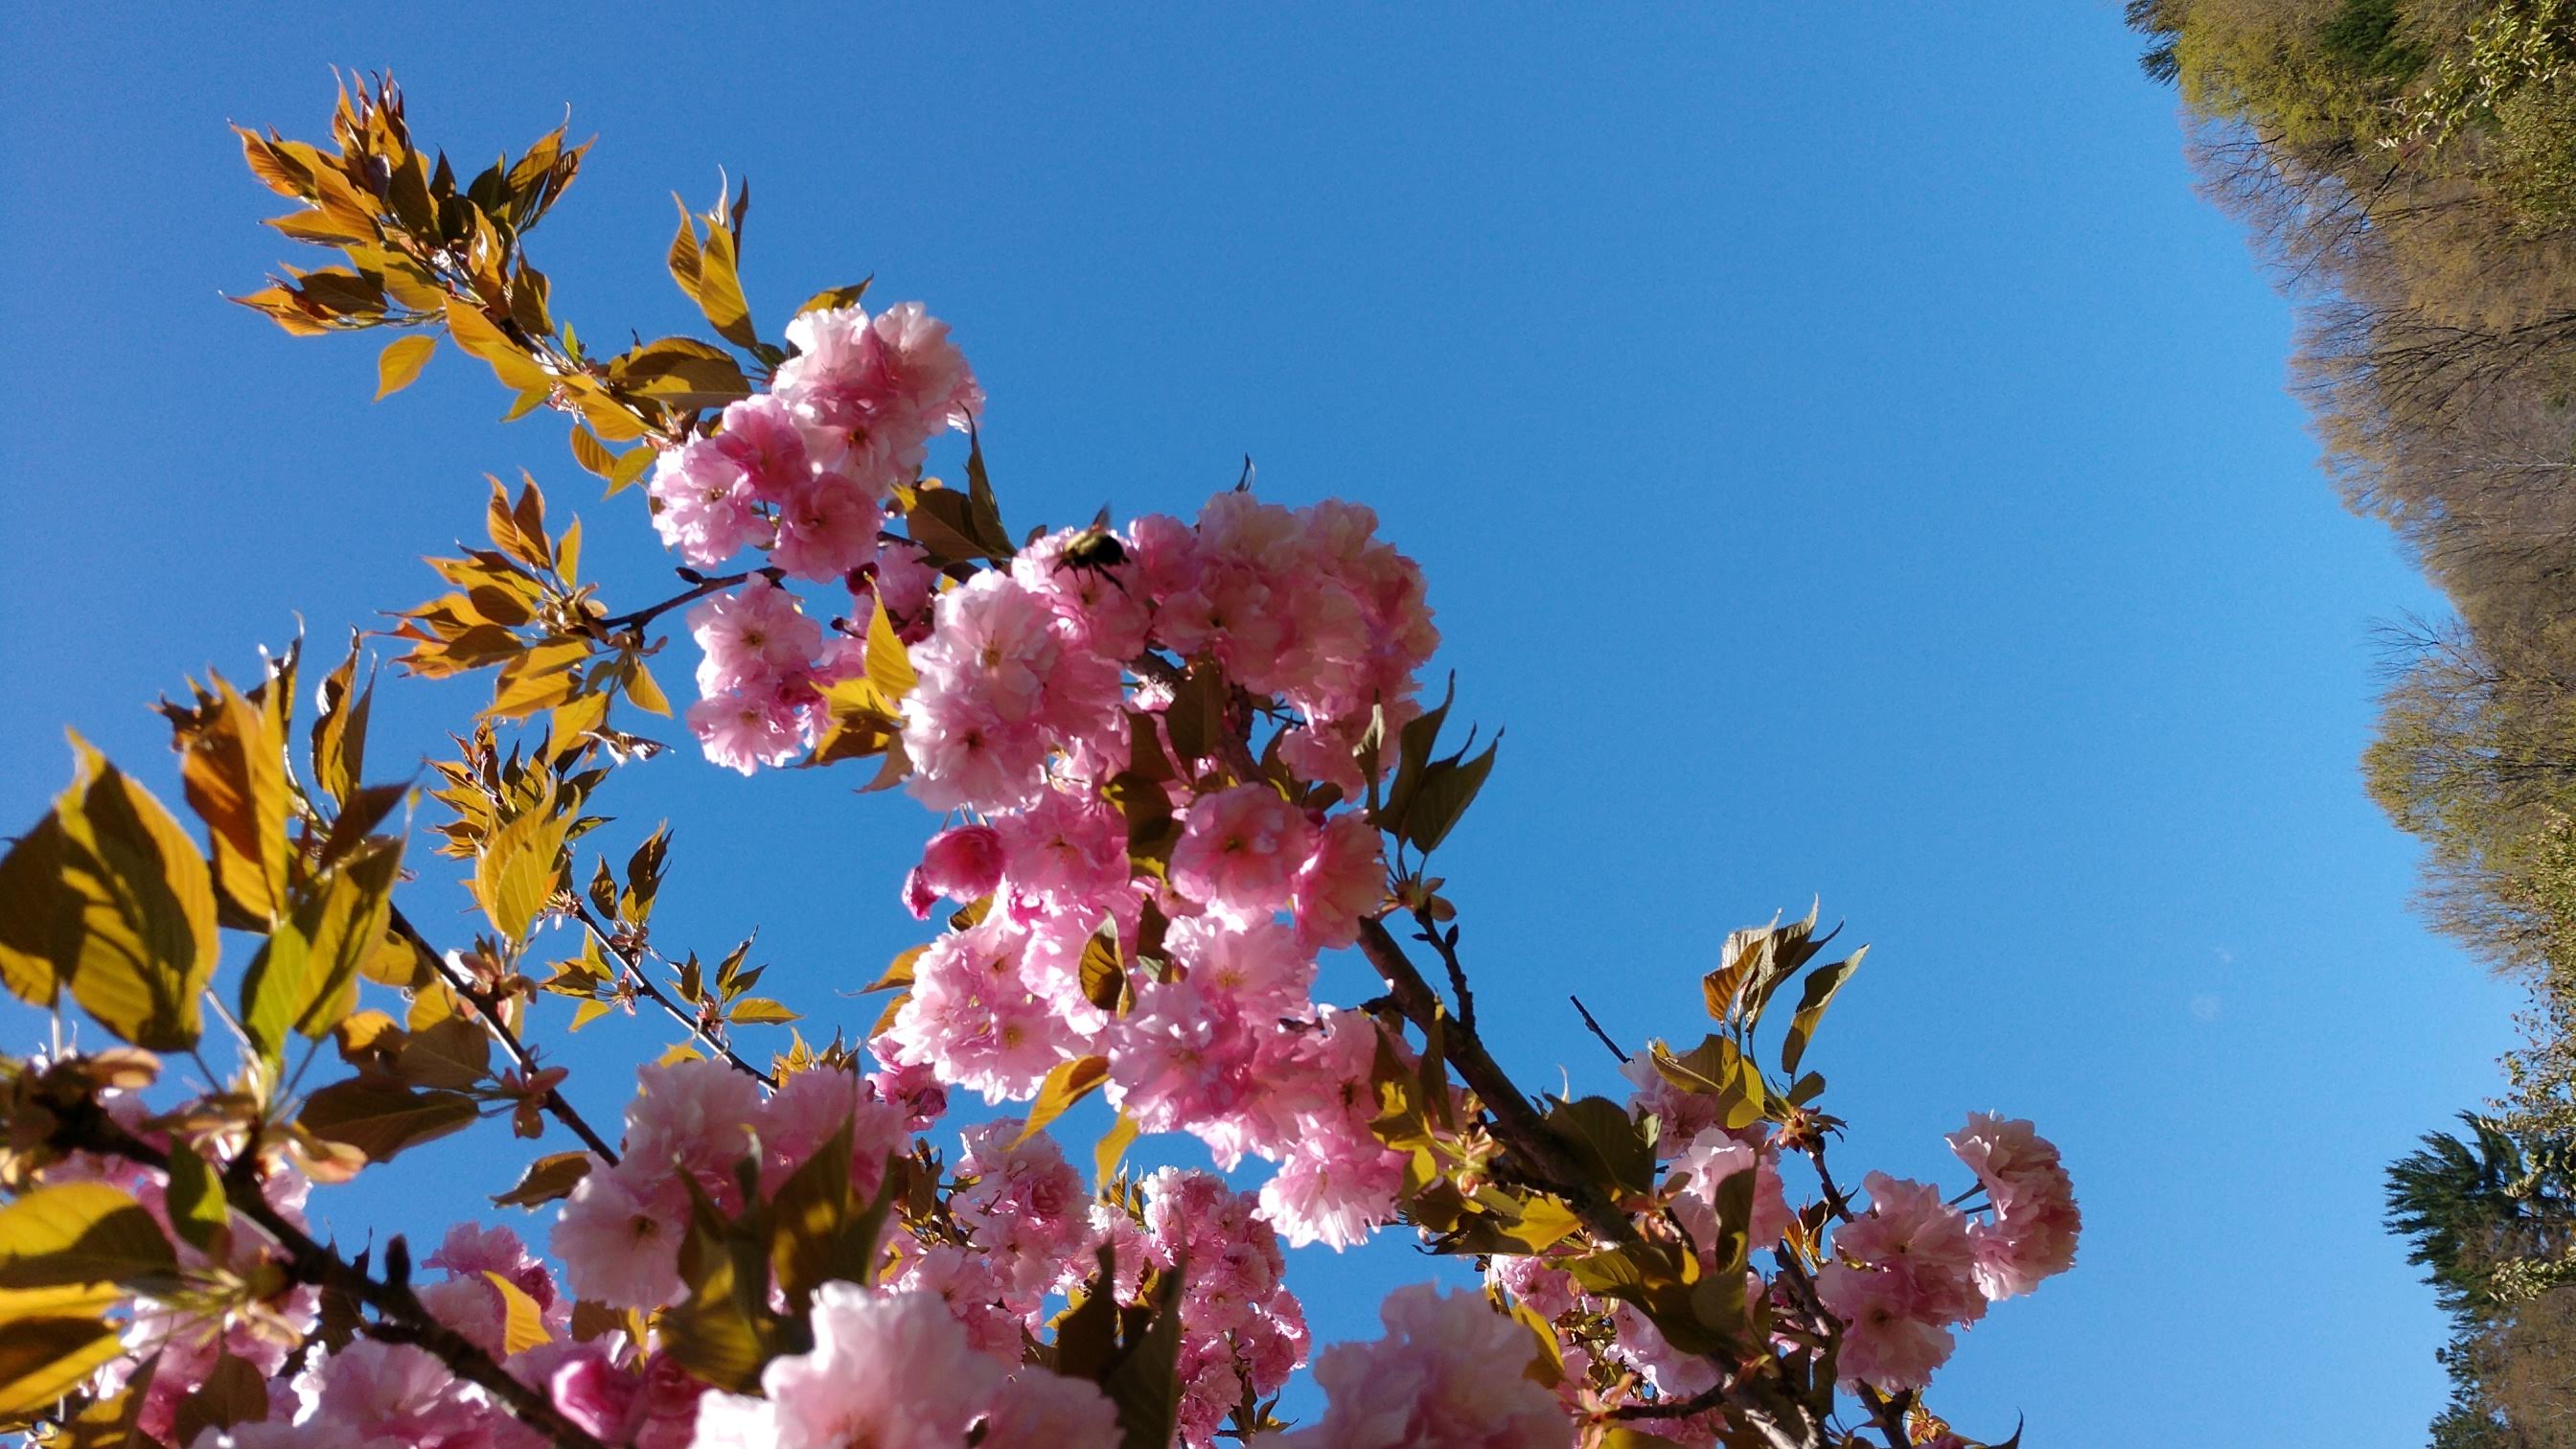 Image of a Kwanzan cherry blossom tree blooming